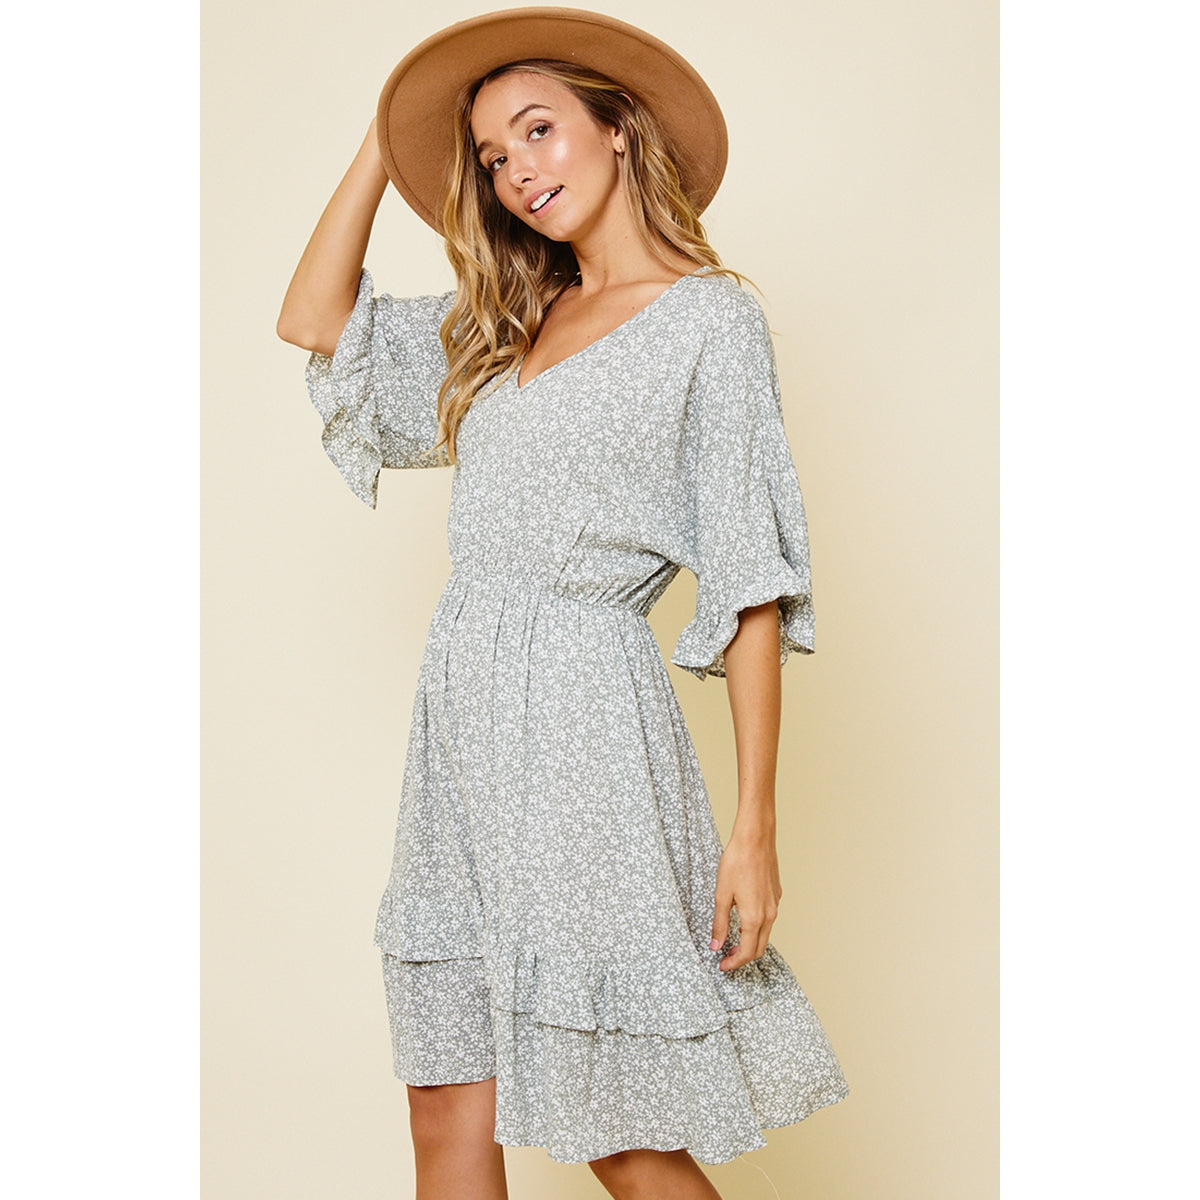 Side view of blonde model posing in a ruffle v-neck dress with a sage and white daisy floral print paired with a tan suede hat